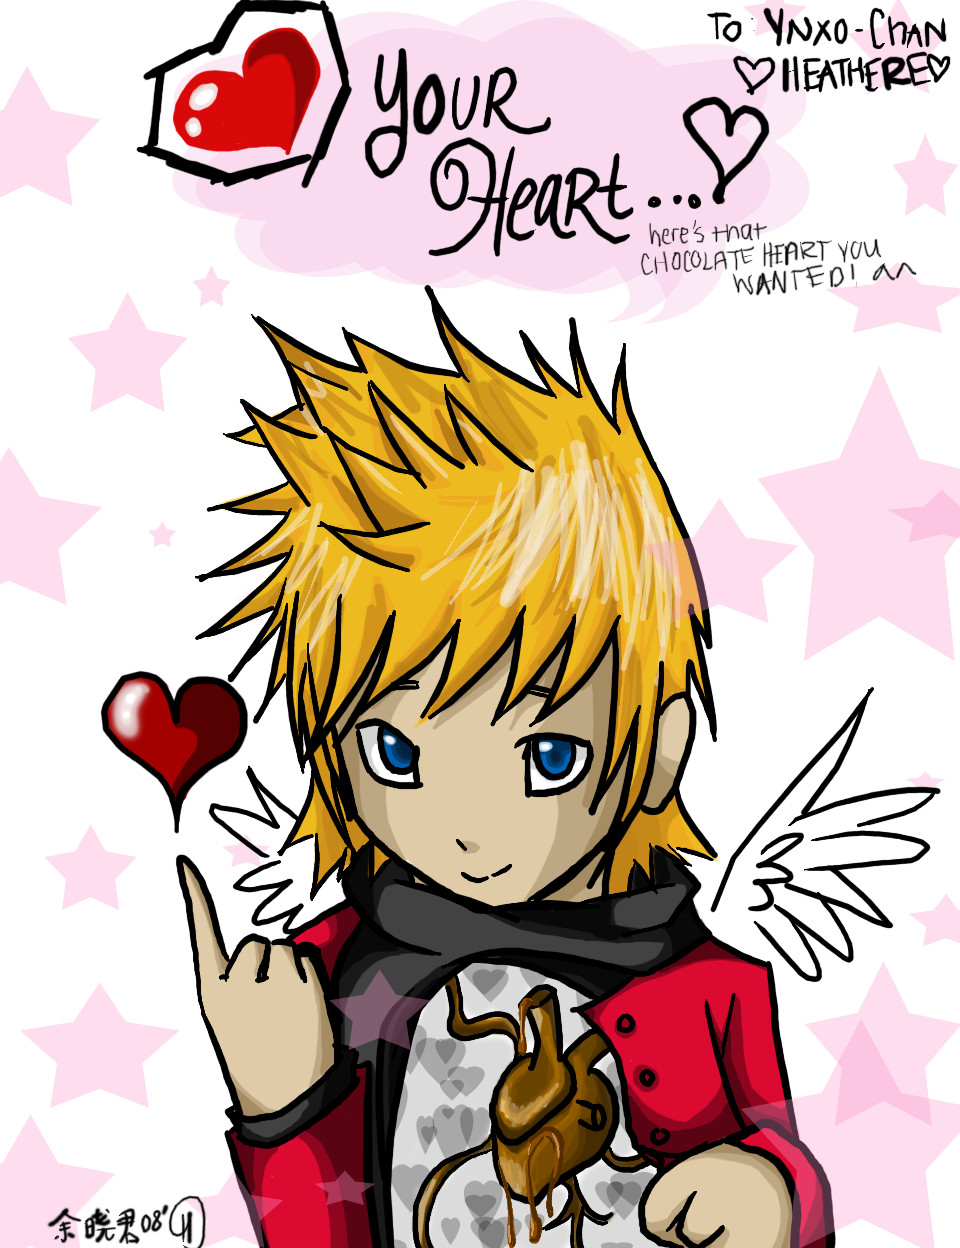 A Chocolate Heart for Ynxo ♥ by Heathere